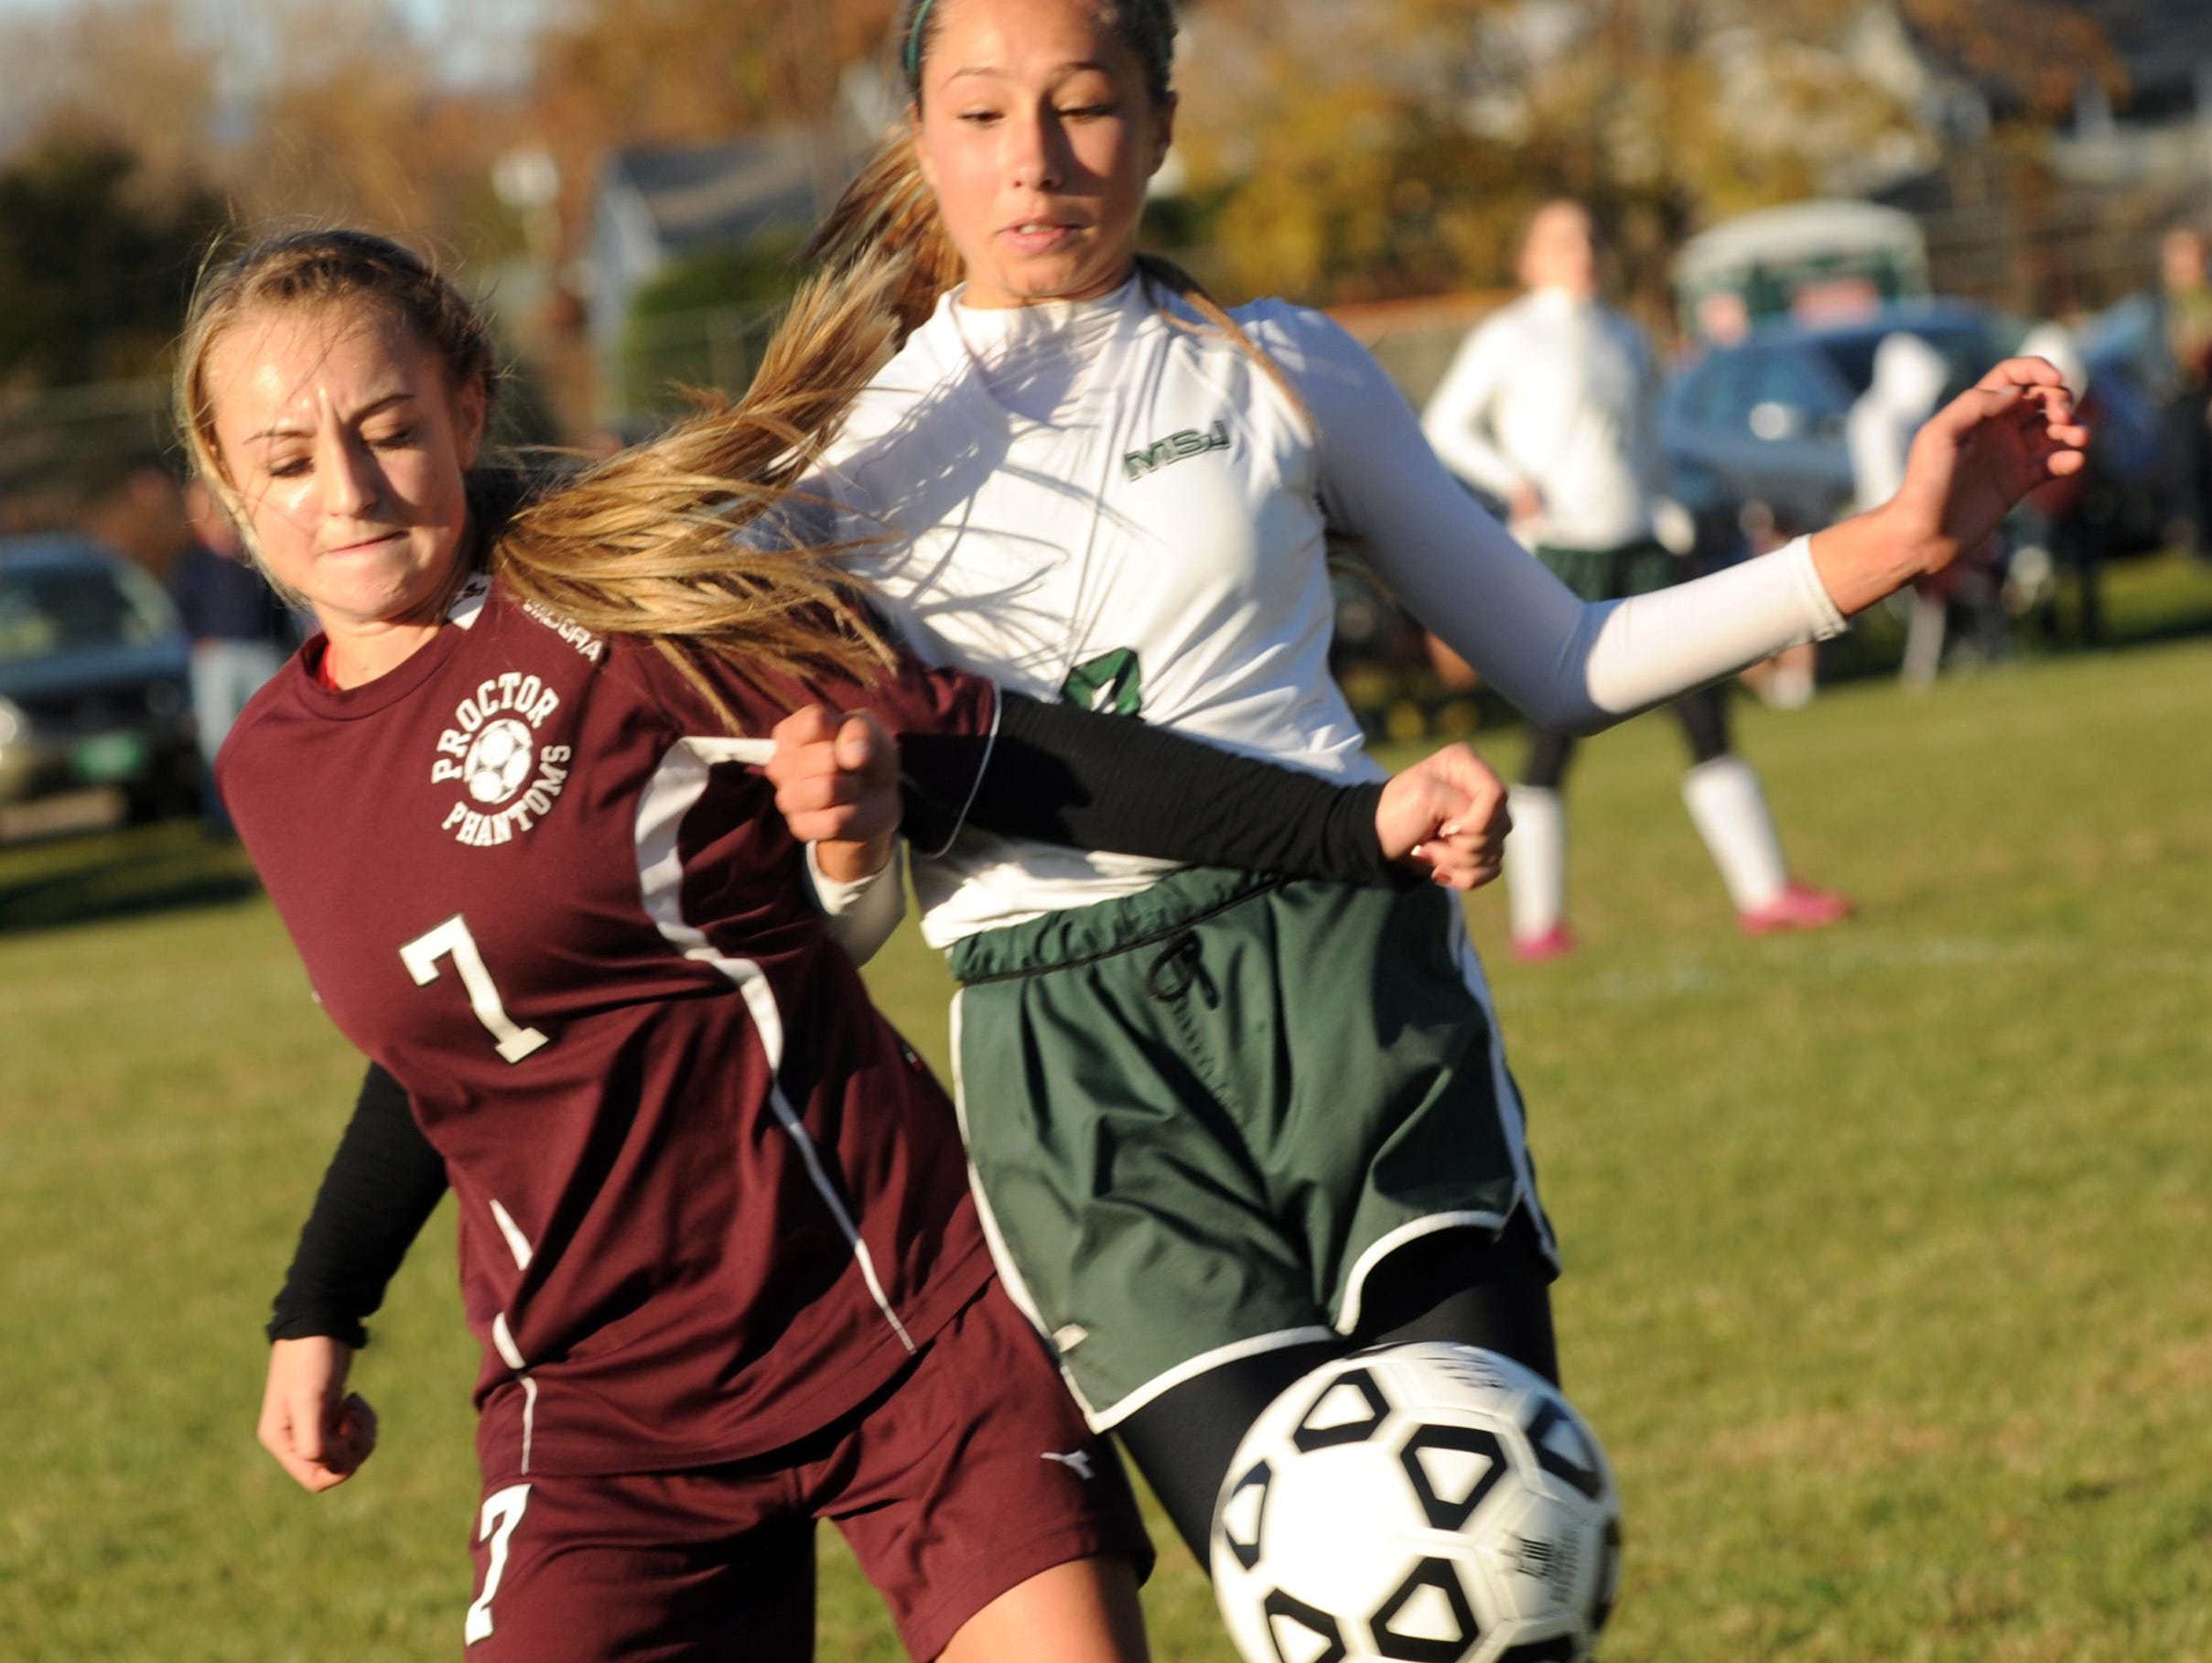 Proctor's Abby McKearin (7) and MSJ's Megan Eaton (8) get all tied up chasing after a loose ball during a 2013 playoff game in Rutland.